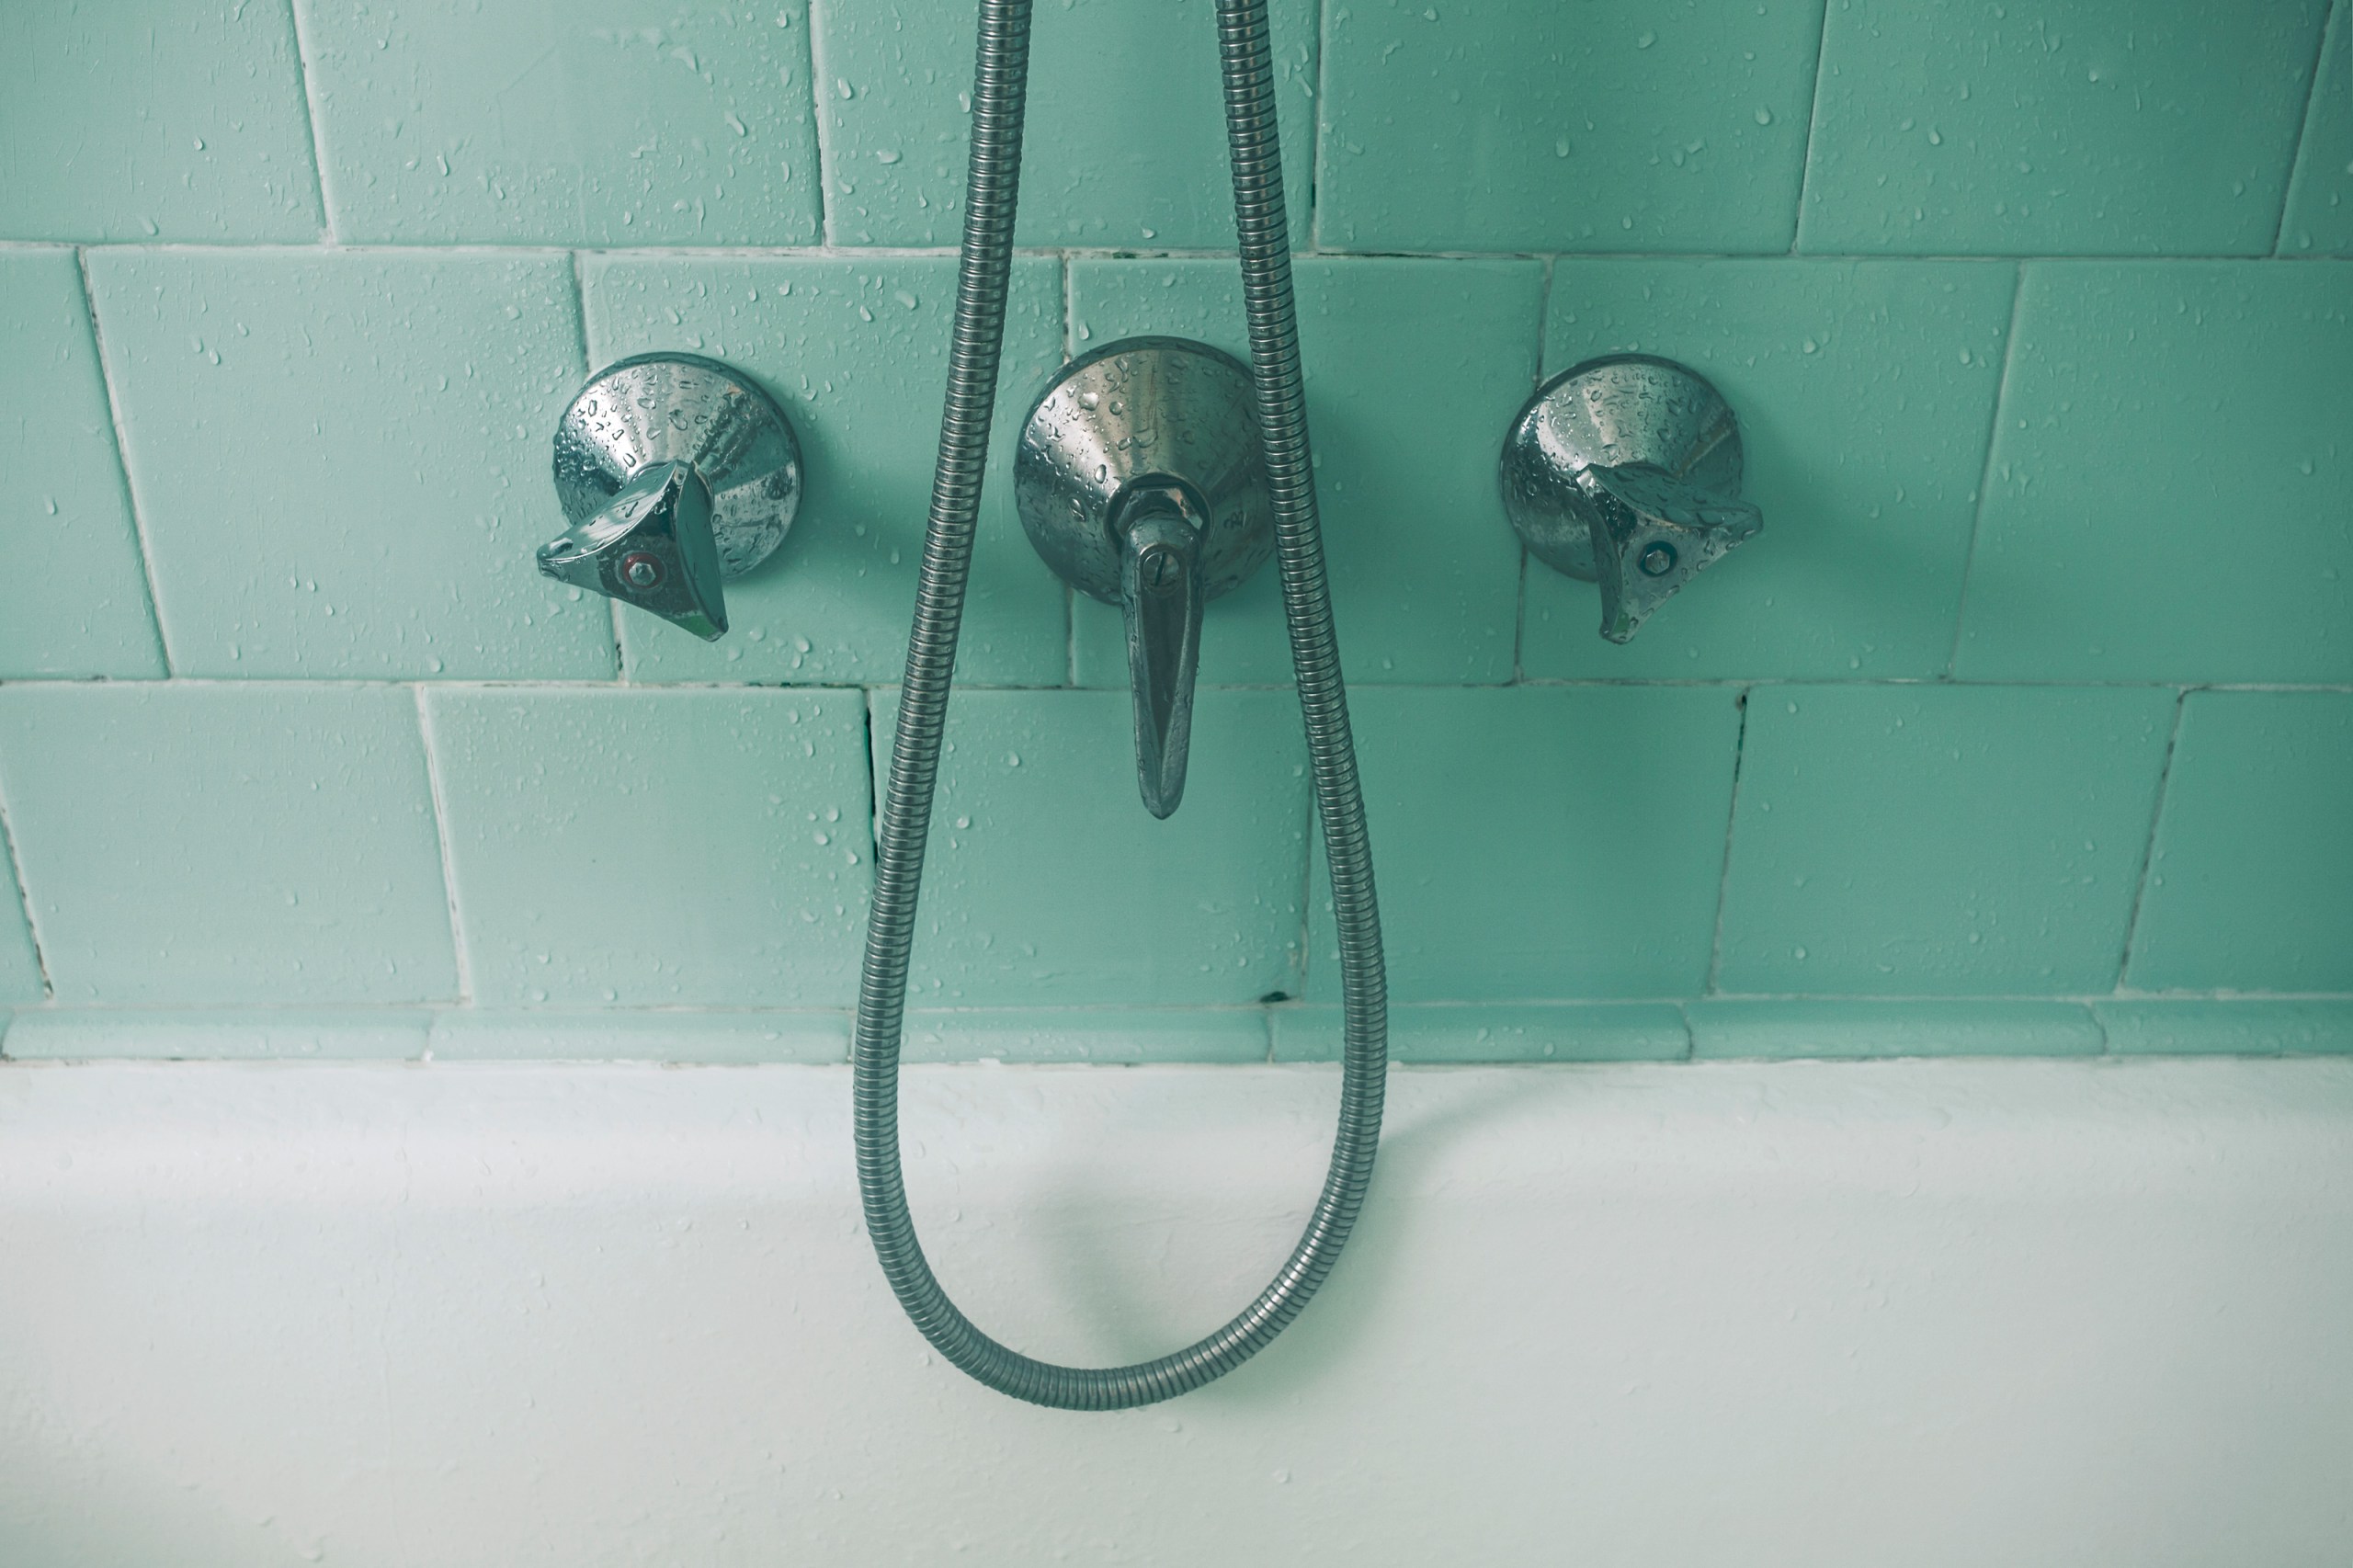 How to Get Rid of Mold in Bathroom Best Ways to Remove Mold